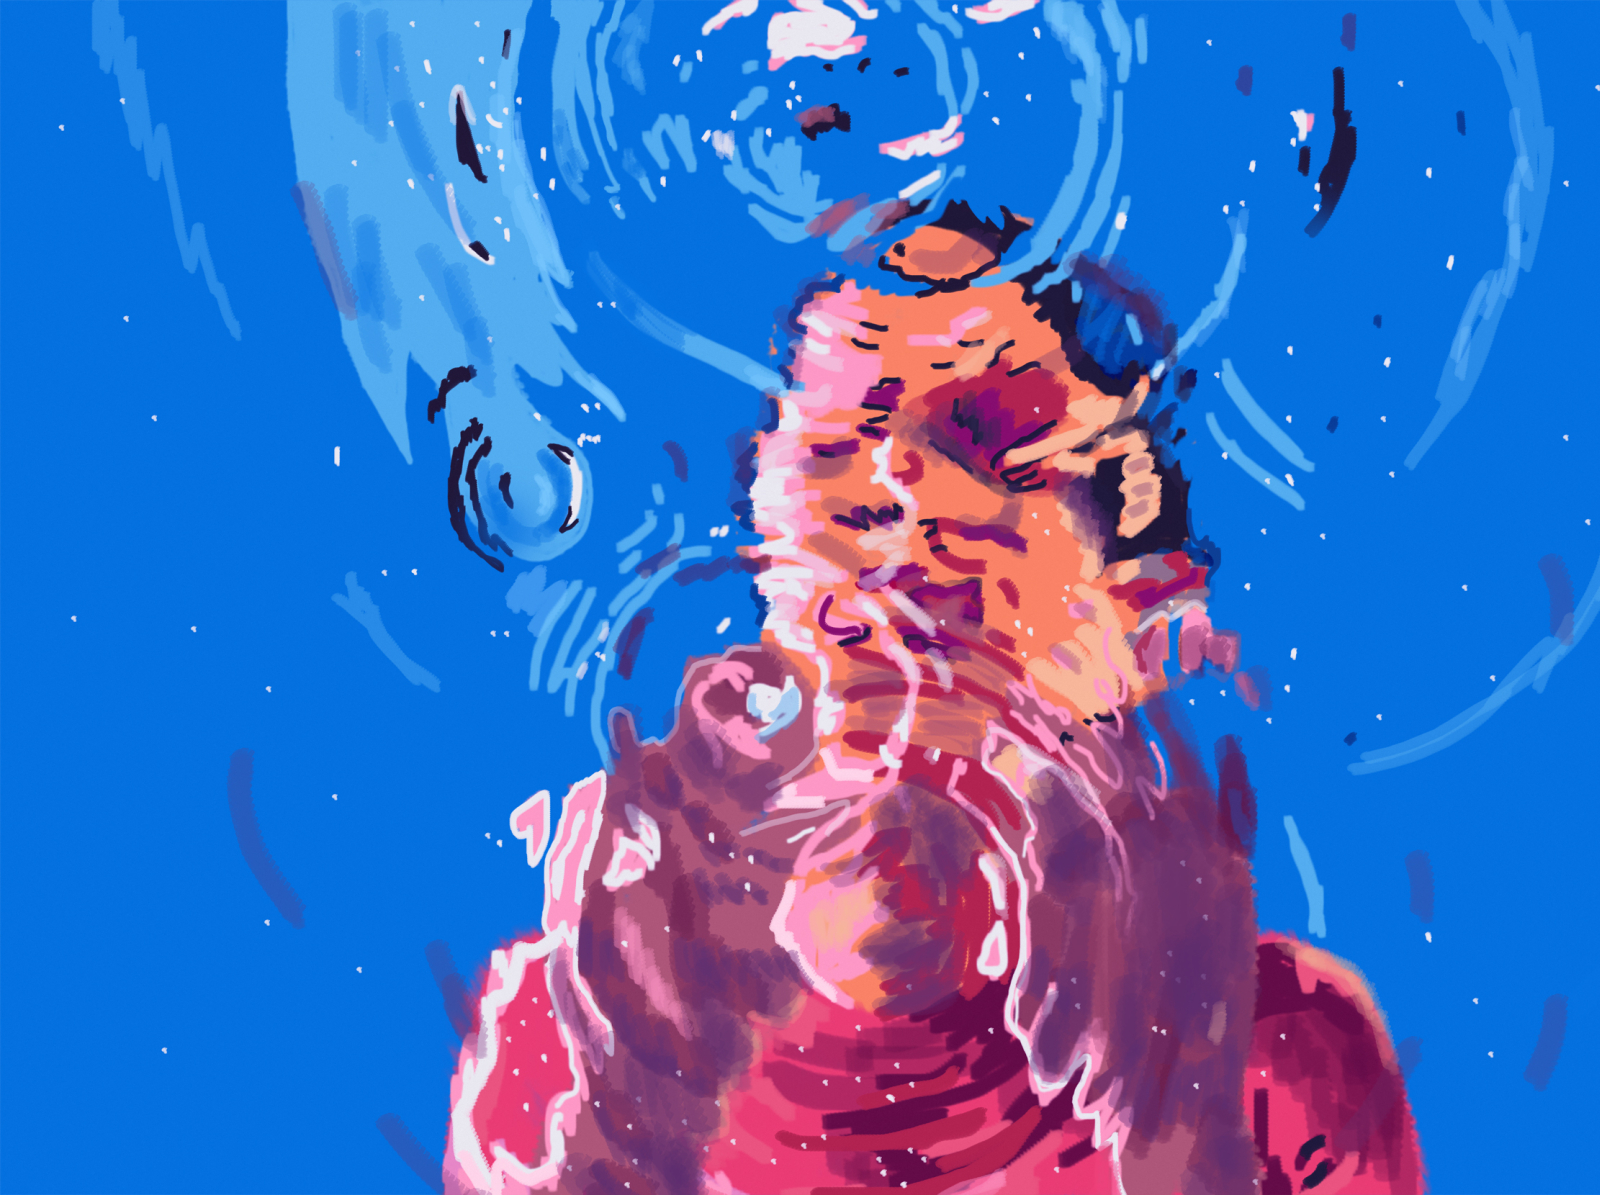 Through Water abstract adobe art bath bathtub circles color deep face girl glass hands illustration impressionism life photoshop portrait prism reflection water